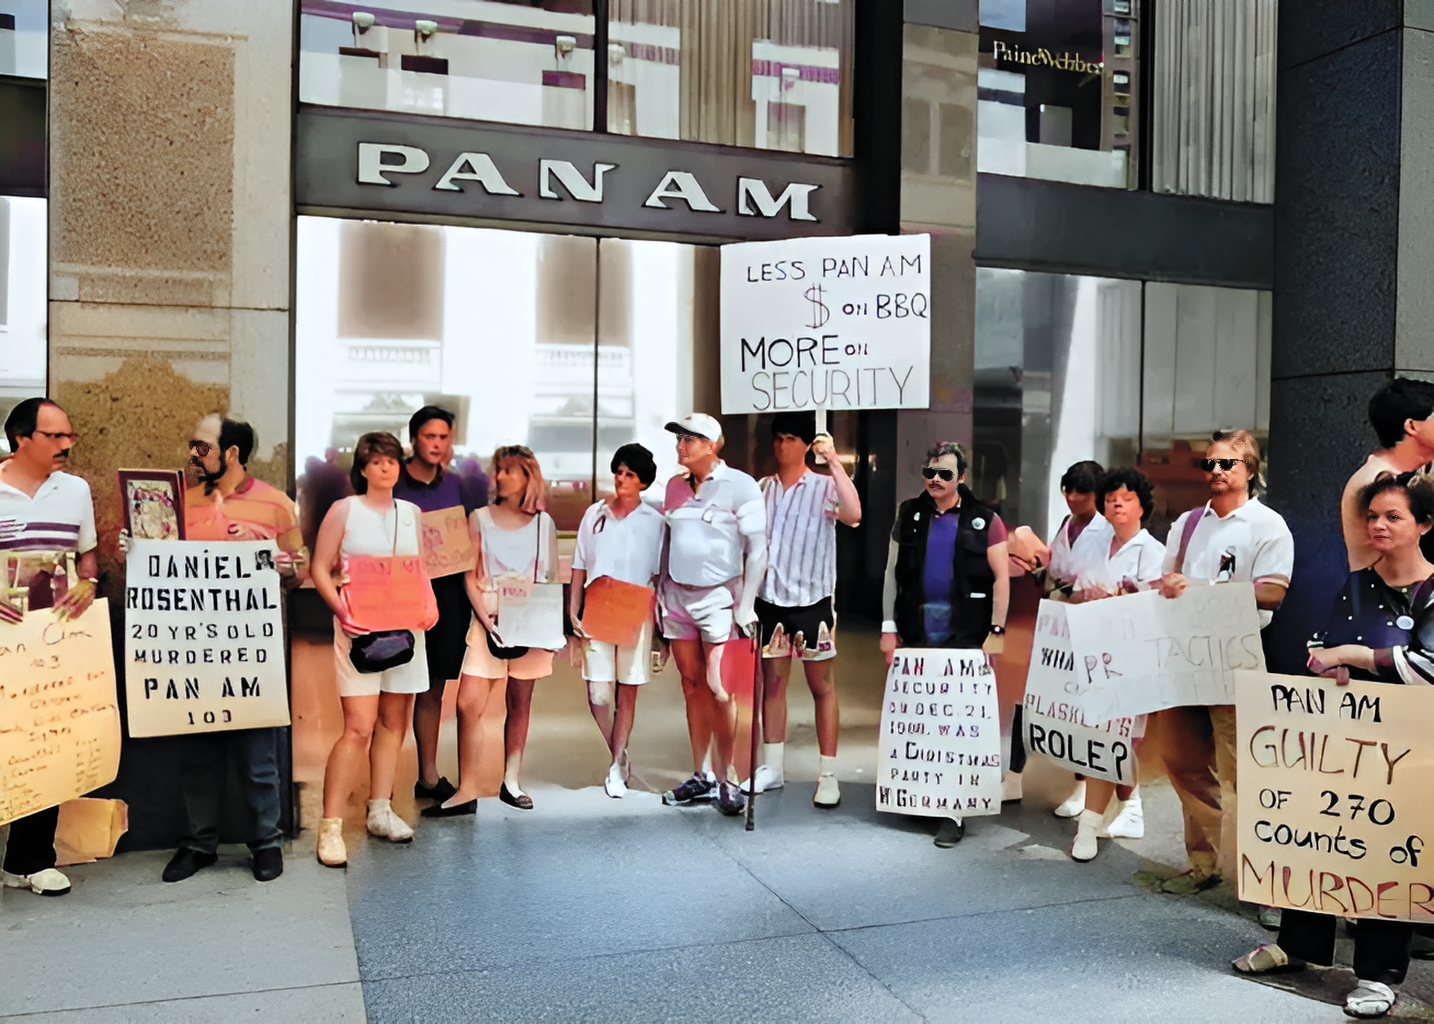 families-demonstrate-in-front-of-the-pan-am-building-in-new-york